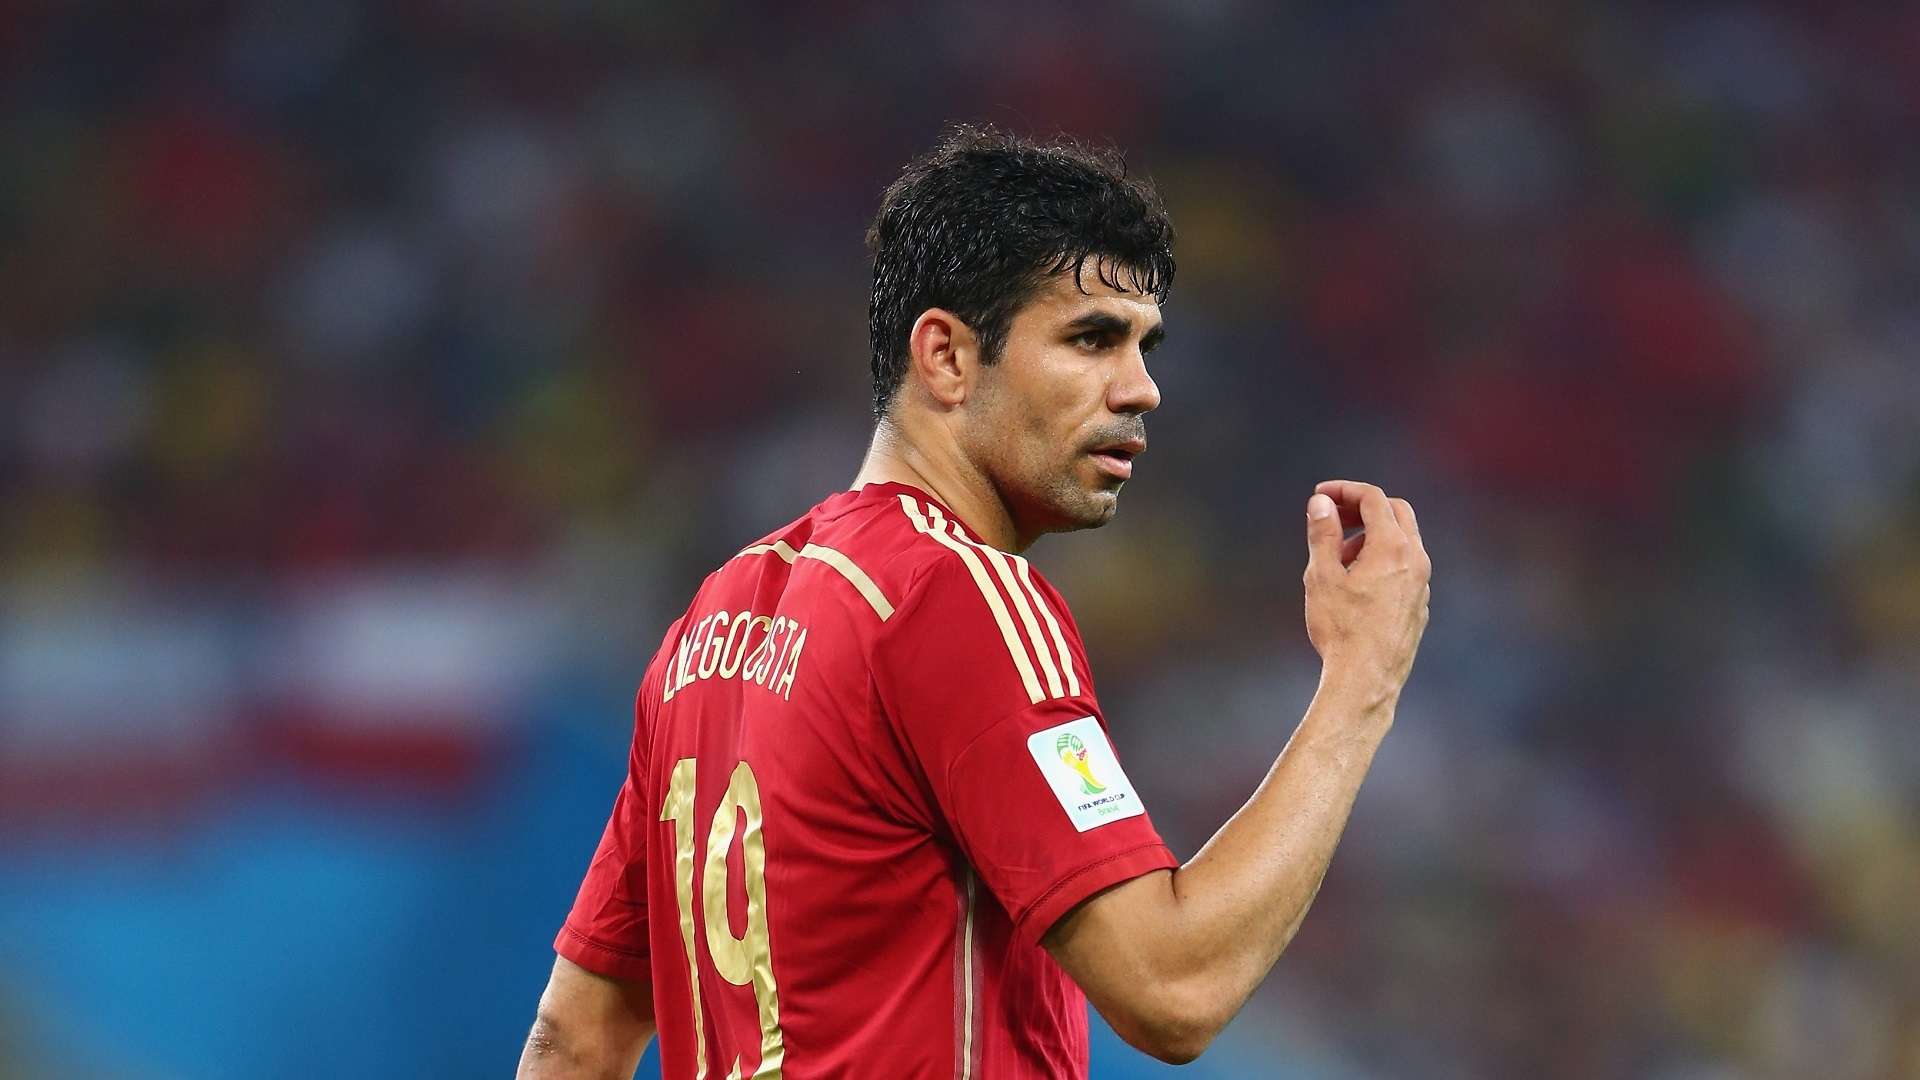 Diego Costa Spain 2014 World Cup 18062014